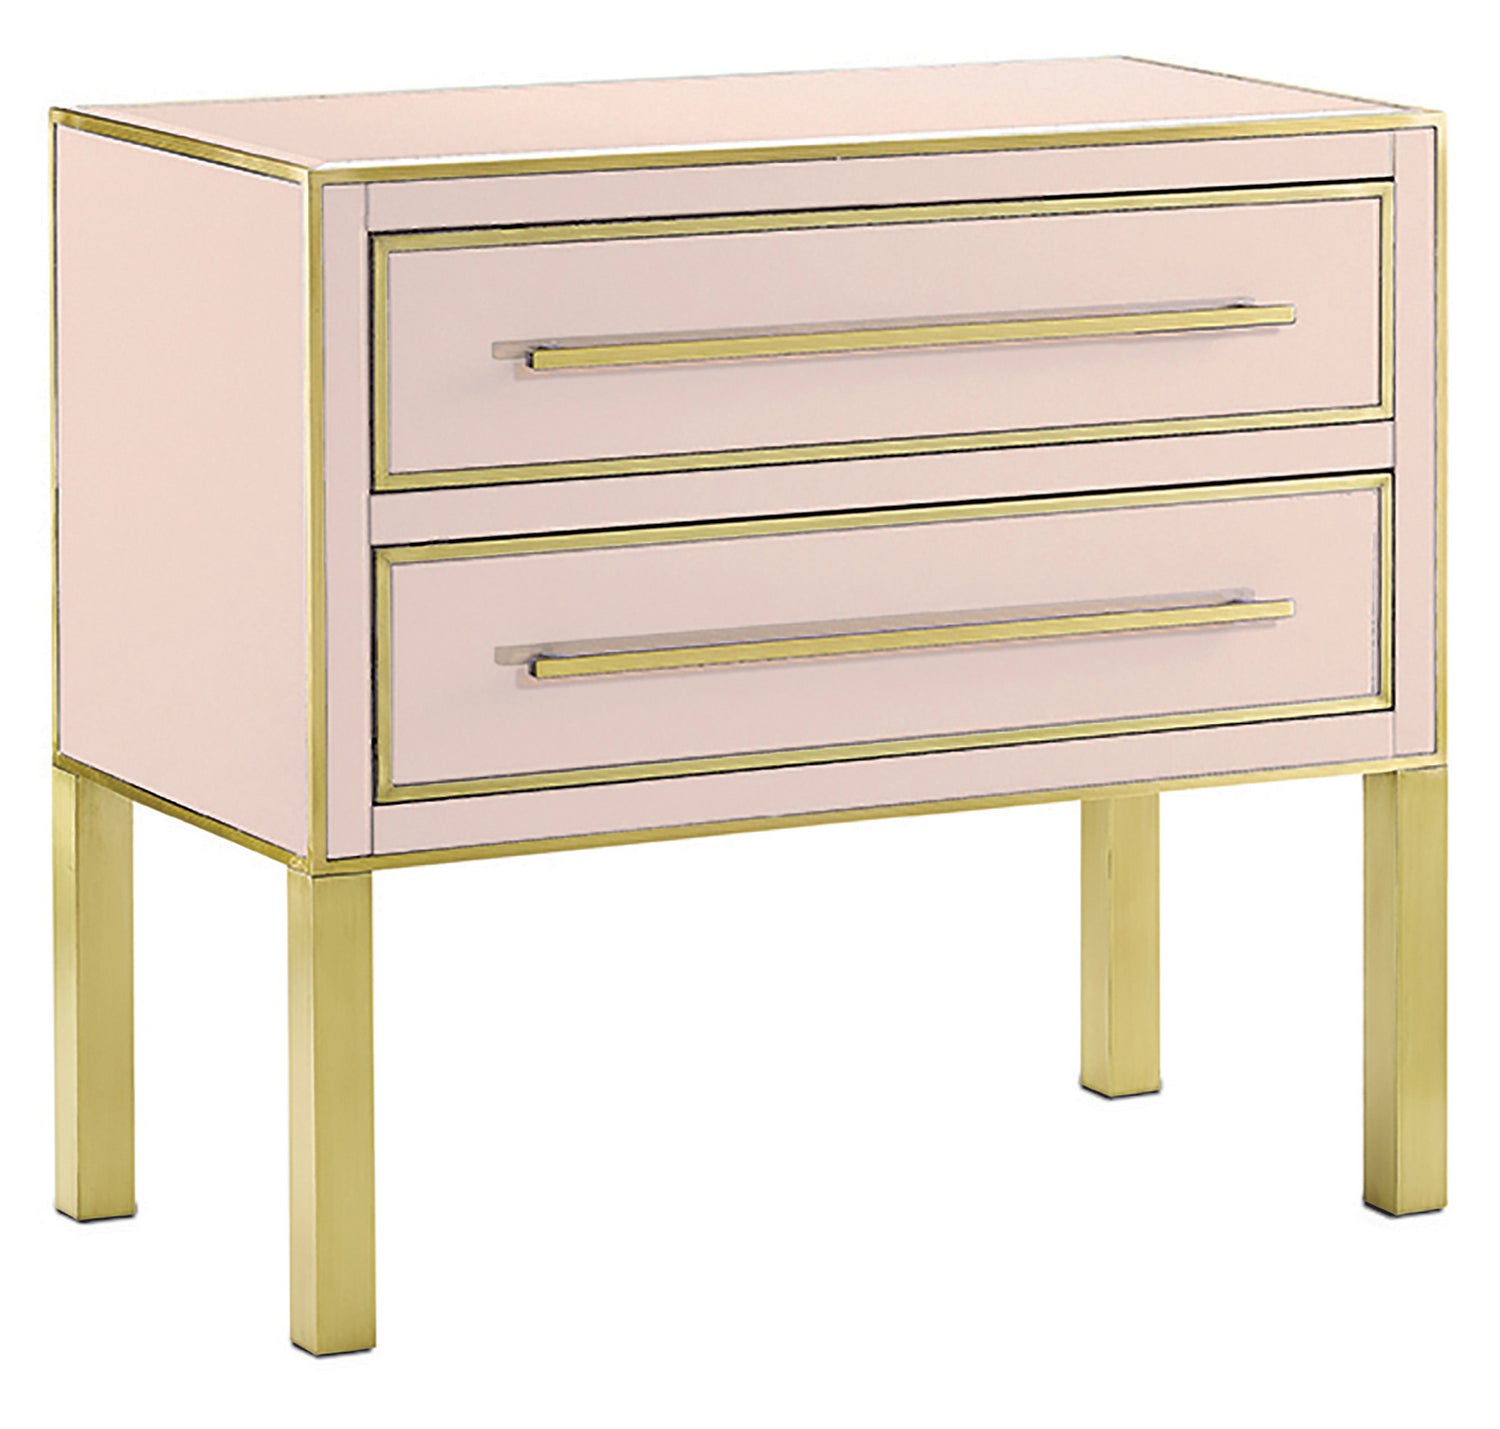 Chest from the Arden collection in Silver Peony/Satin Brass finish